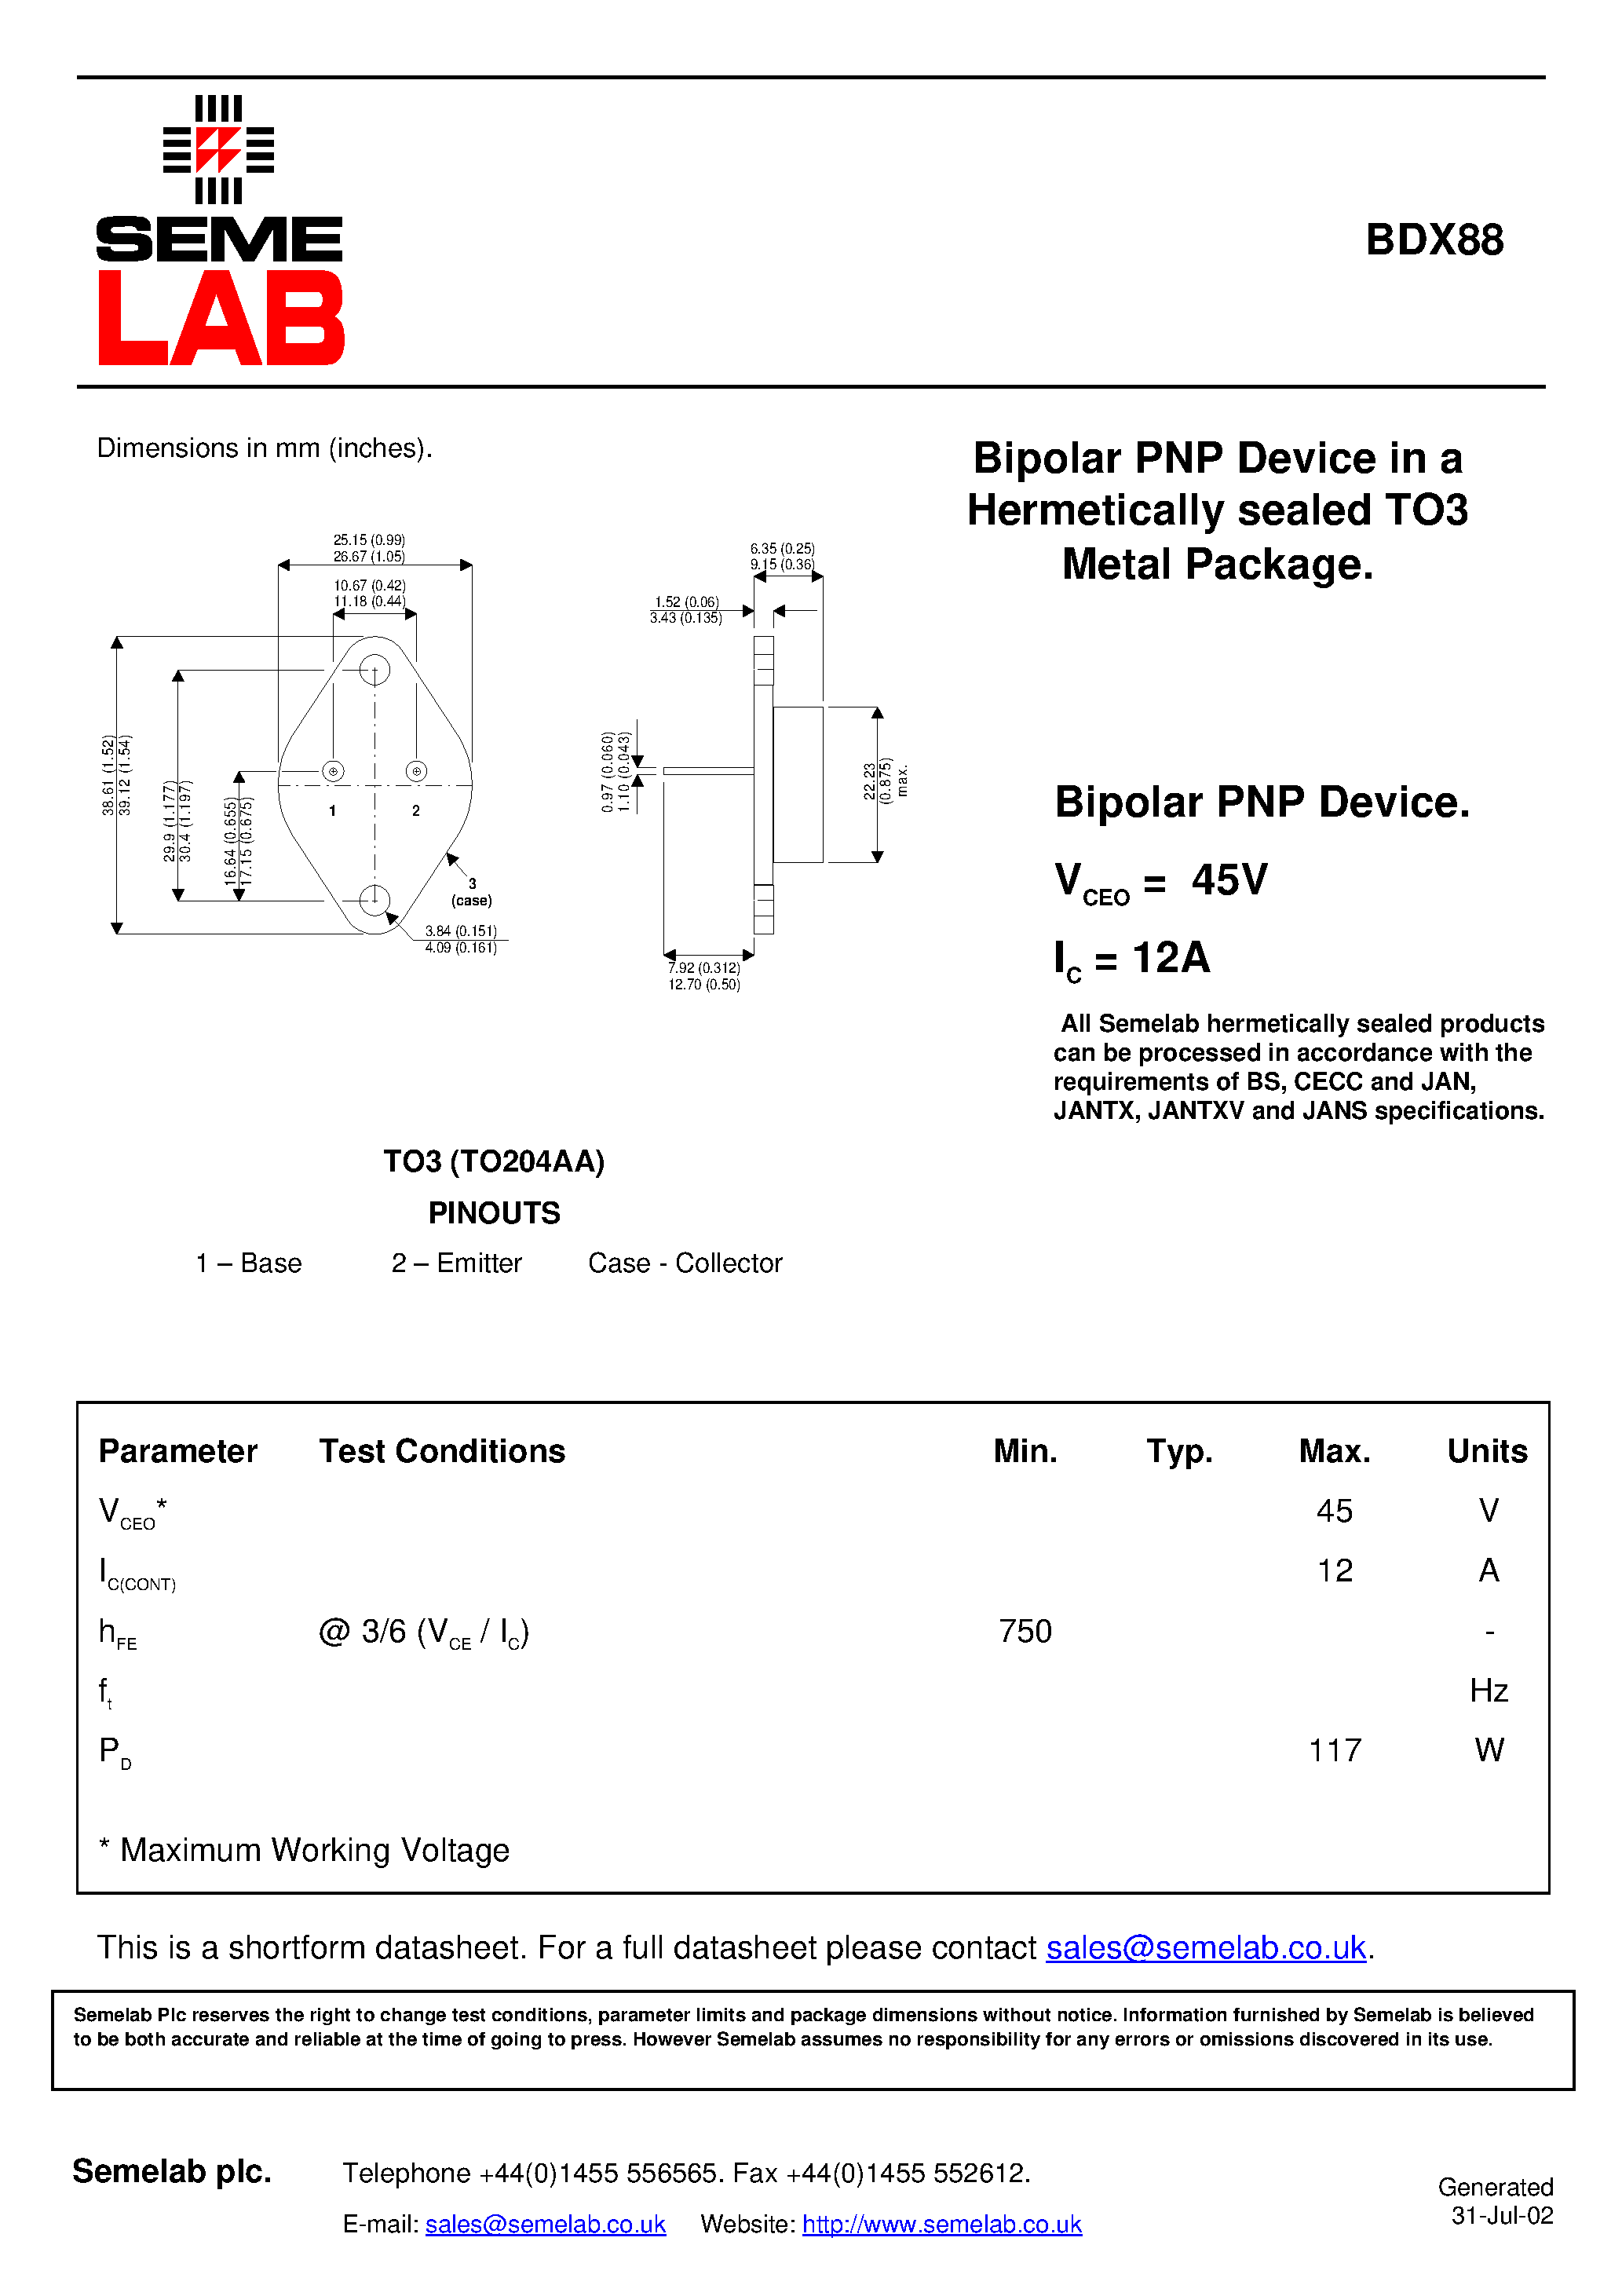 Datasheet BDX88 - Bipolar PNP Device in a Hermetically sealed TO3 Metal Package page 1